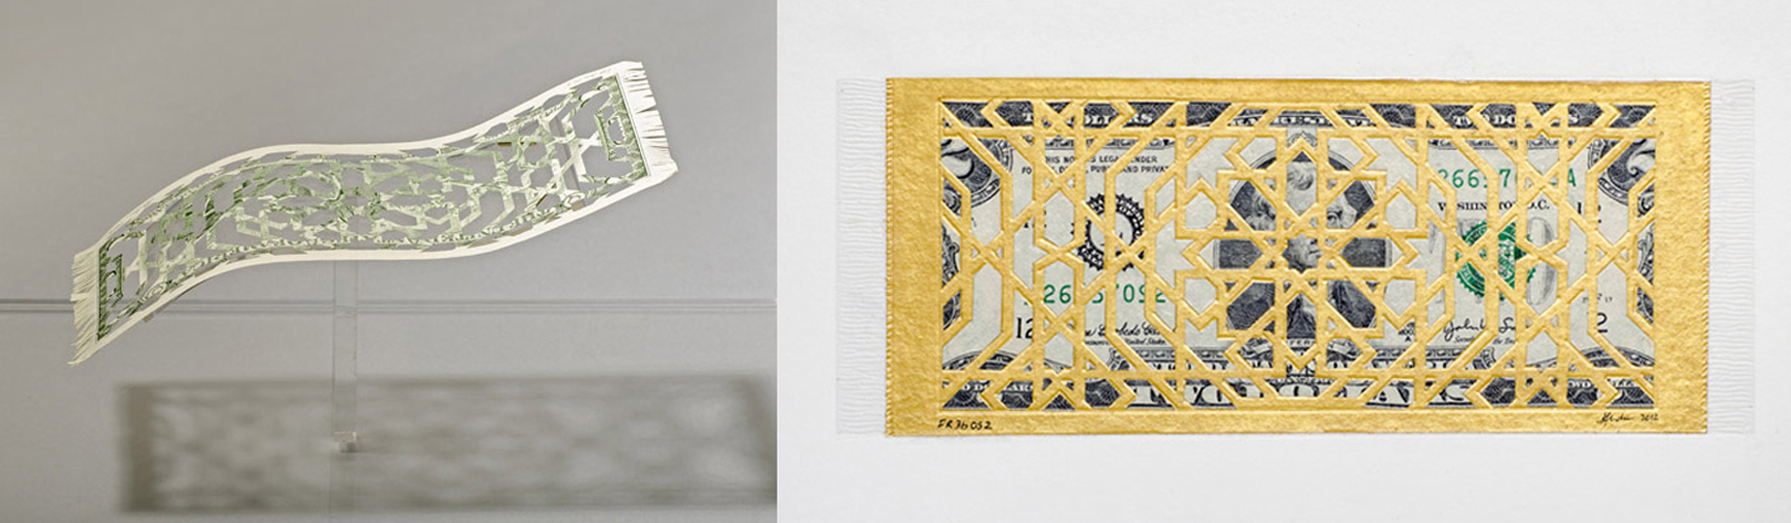   Deconstruction of the Myth of the Flying Rug , 2012 - (ongoing), diptych, Handcut currency collage on gold inked Vasli paper and US$ bill in custom Perspex vitrine, Dimenstions variable. 